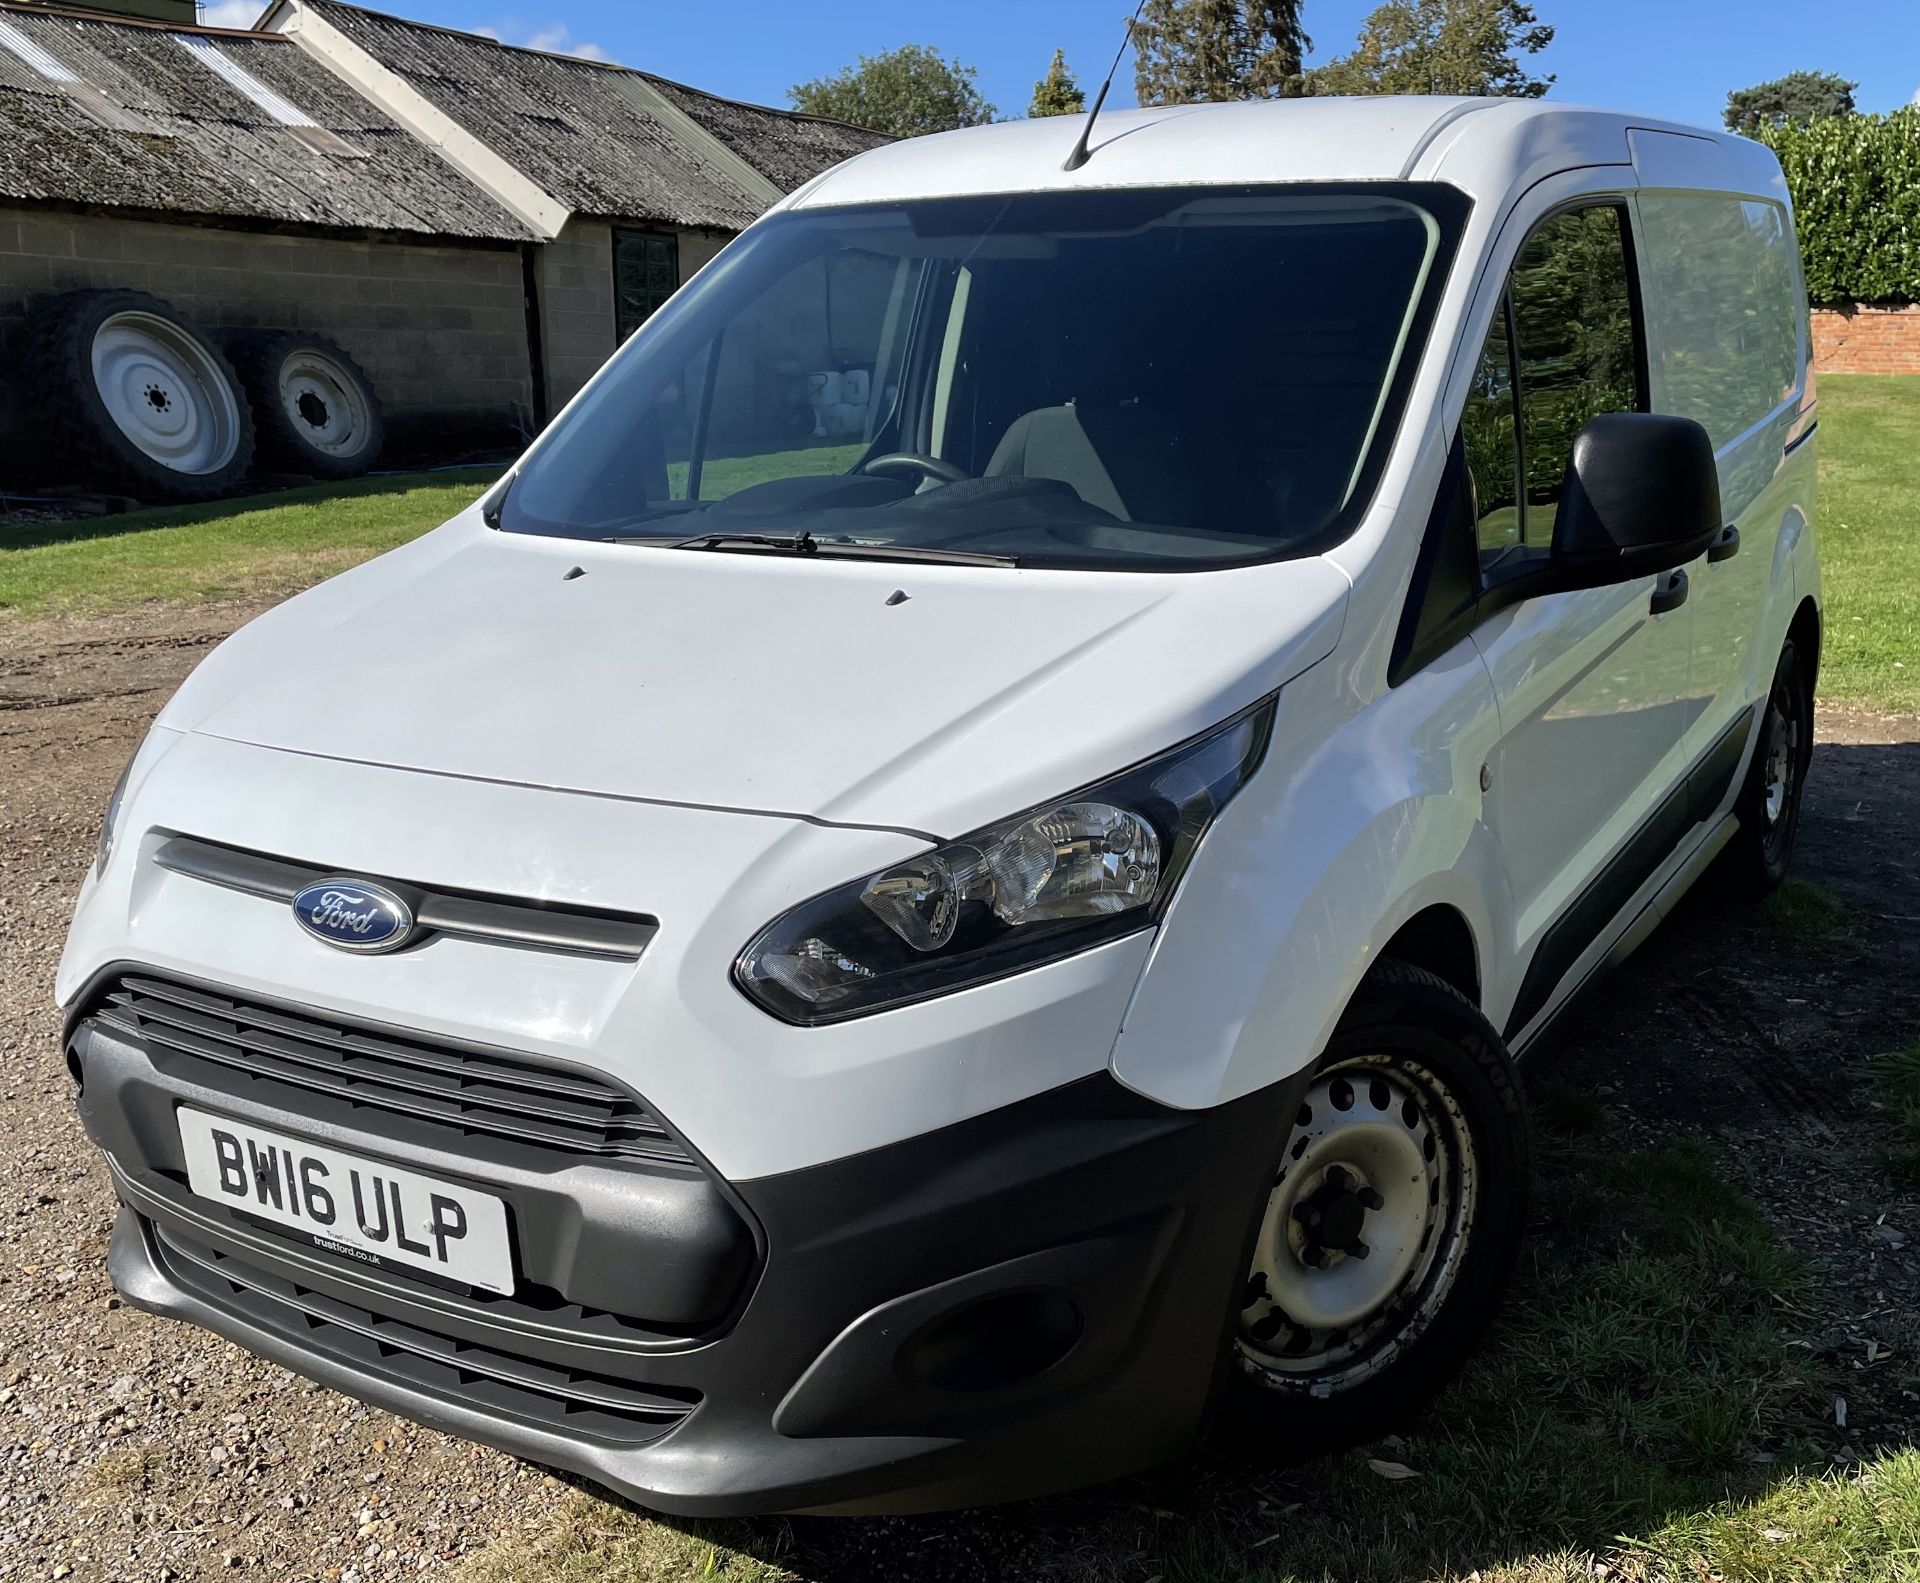 Ford PU2 Transit Connect 200, 1.6 TDCi 75ps Panel Van (Euro 5), Registration BW16 ULP, First - Image 2 of 21